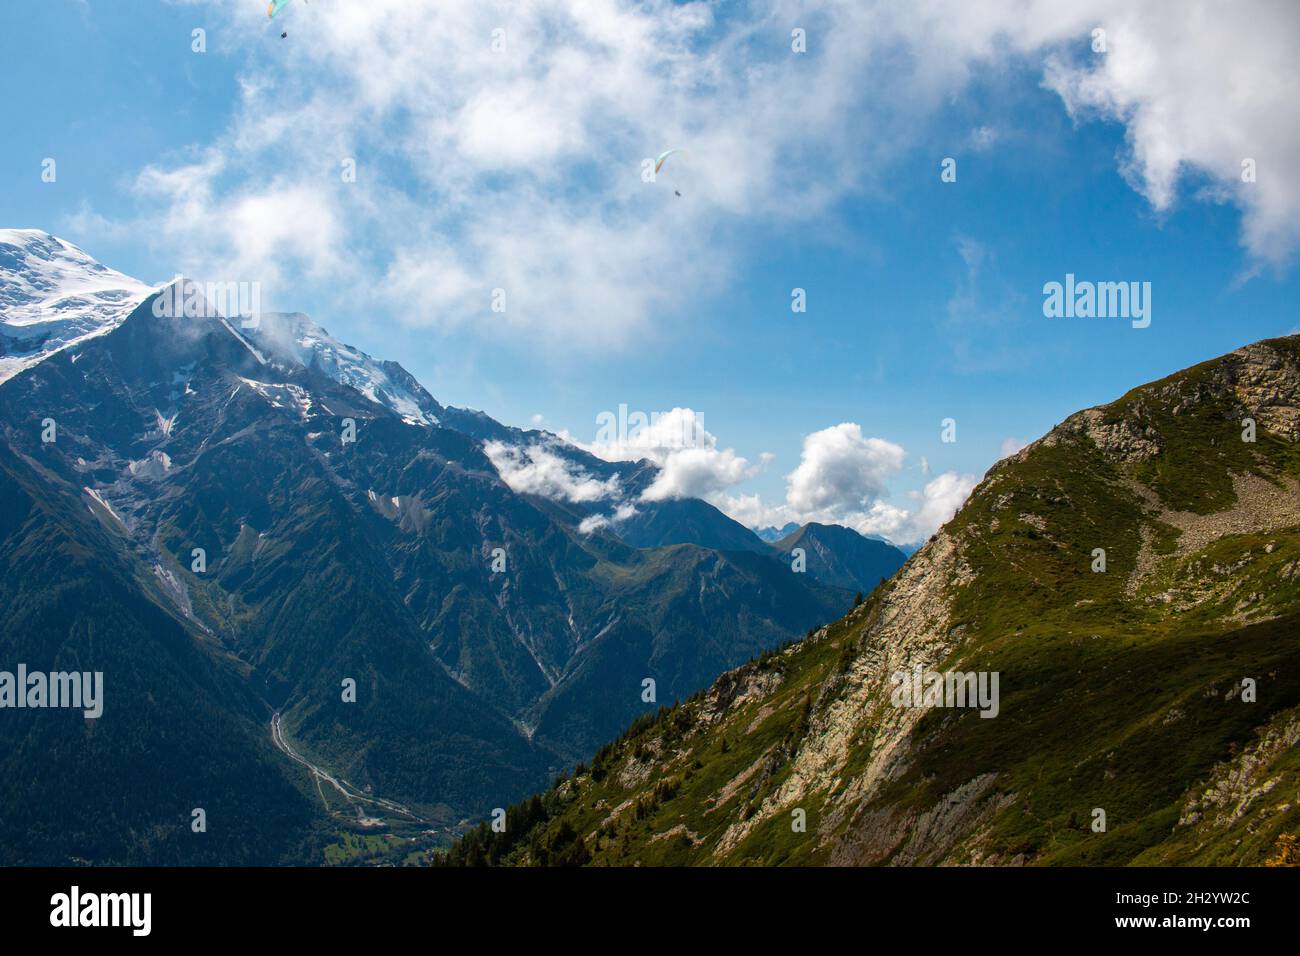 The view from a hiking trail between Refuge de Bellachat and Les Houches (near Chamonix) towards the Massif du Mont Blanc. September 2021 Stock Photo